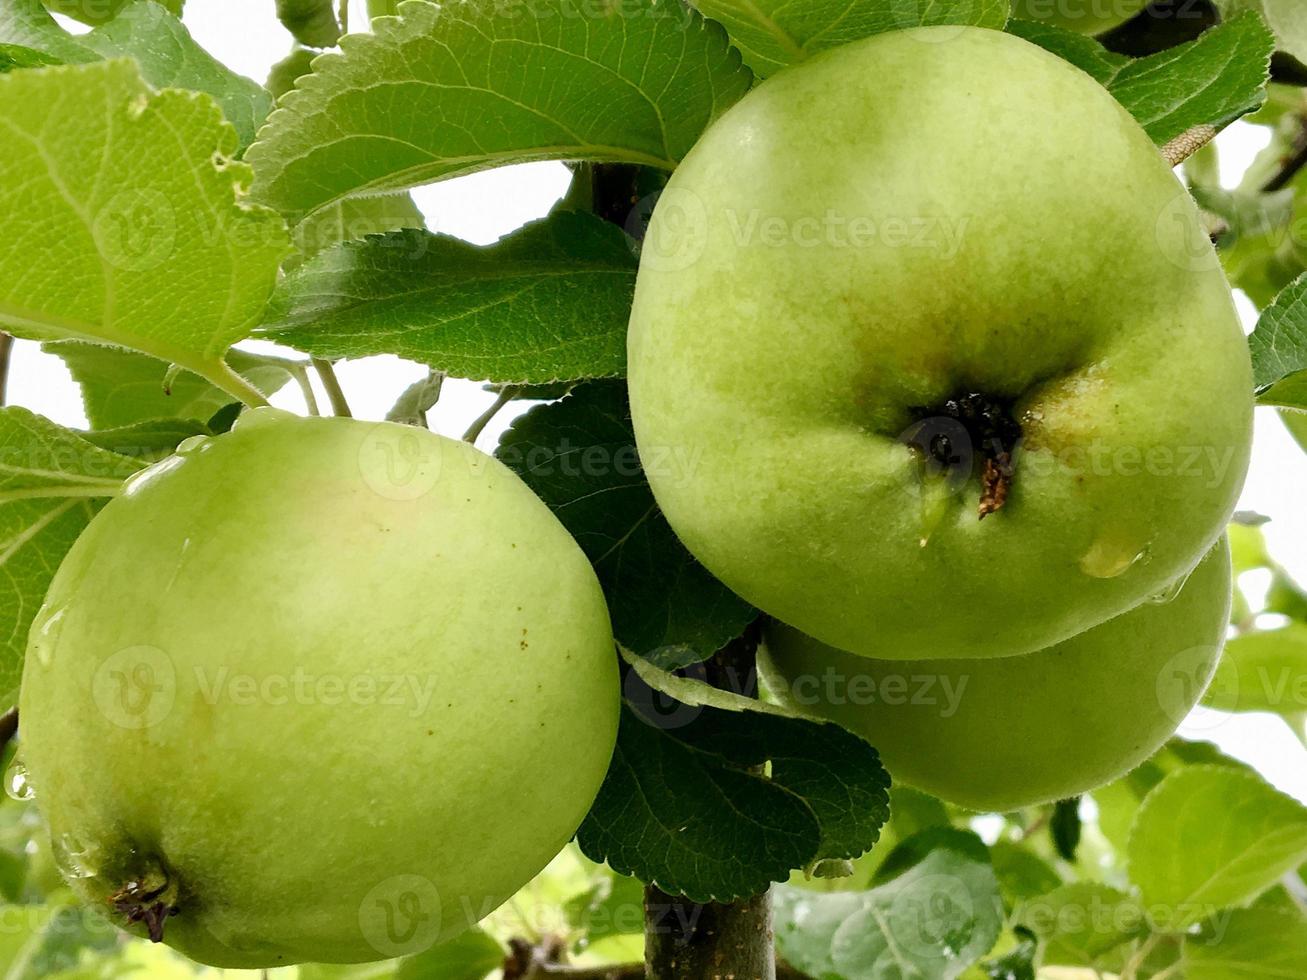 Sweet fruit apple growing on tree with leaves green photo